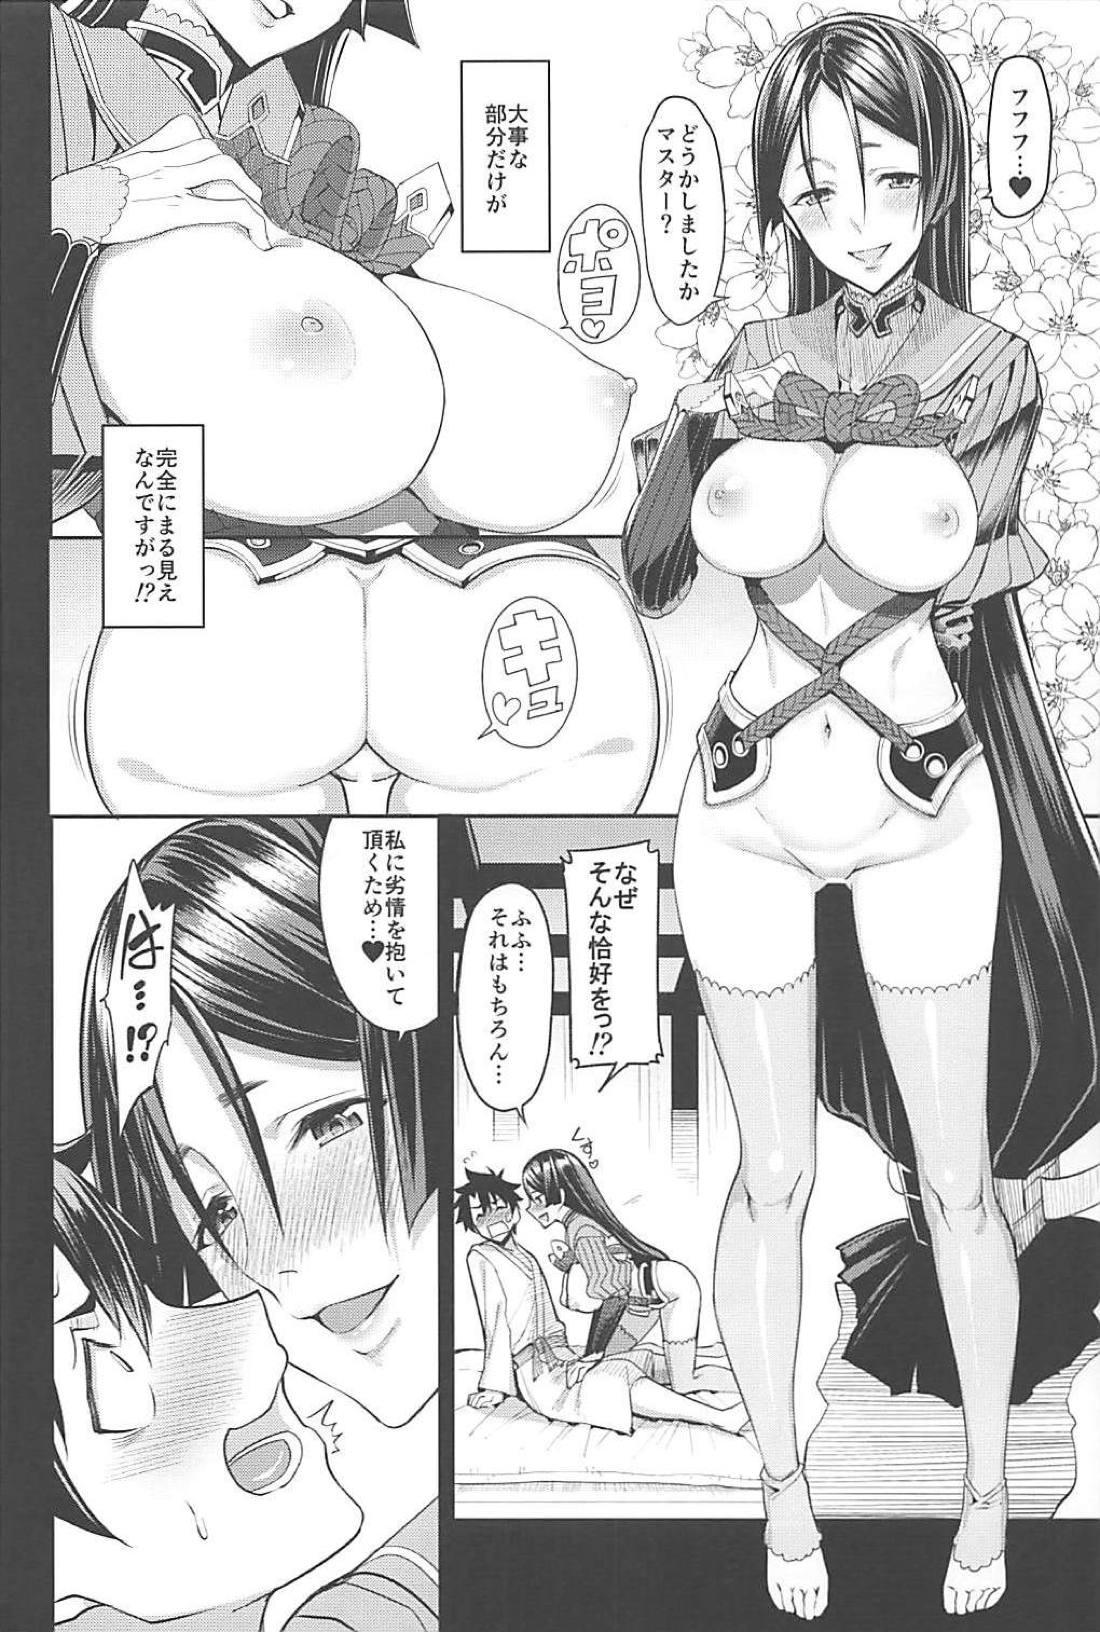 Anal Gape Another Personality - Fate grand order Mamadas - Page 5